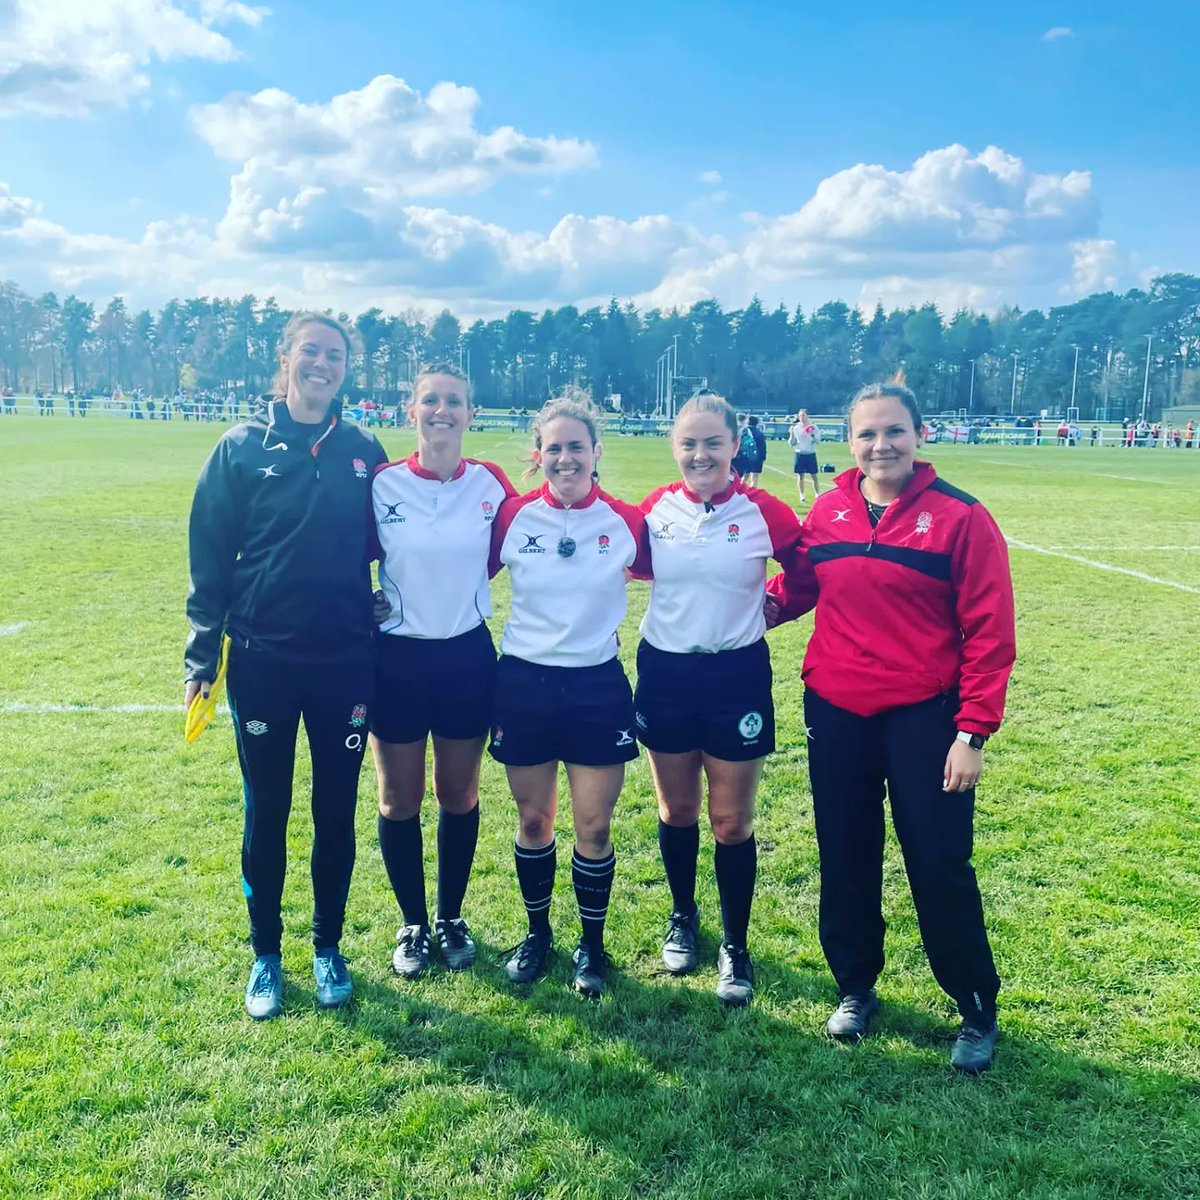 Definite career highlight to date on Saturday, in the middle for Ireland v Wales at the U18 Six Nations Festival. Hard fought match working alongside some superb colleagues from England, France and Ireland. #rugby #rugbyreferee